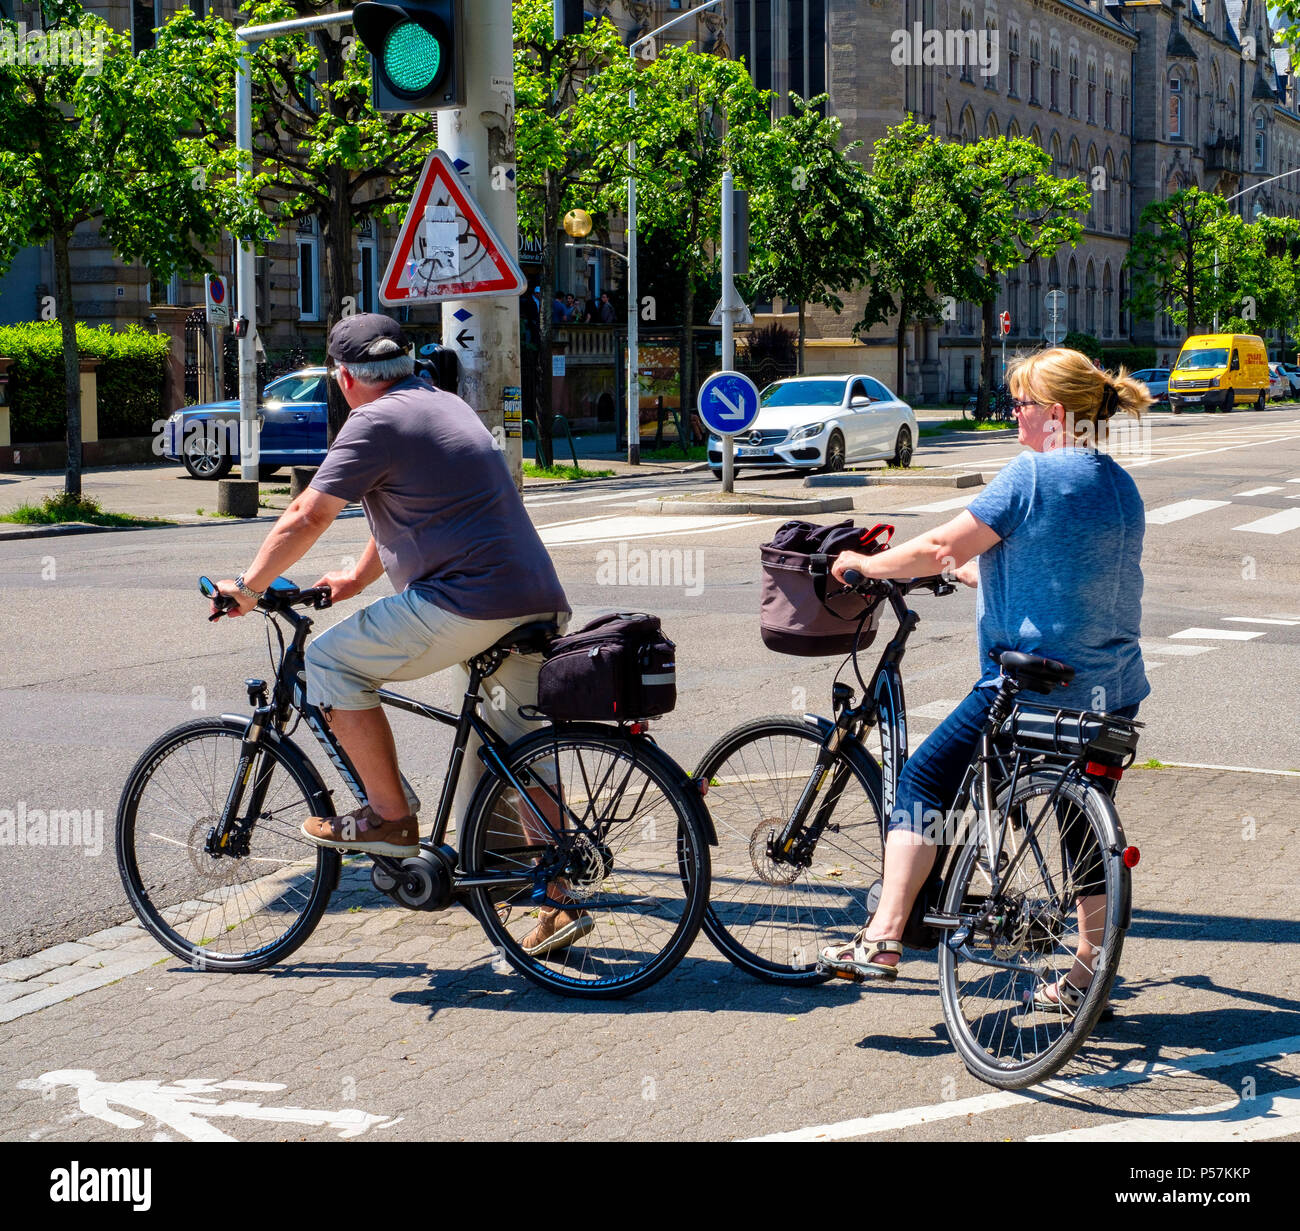 Strasbourg, mature couple of cyclists waiting at traffic light before crossing the street, Alsace, France, Europe, Stock Photo